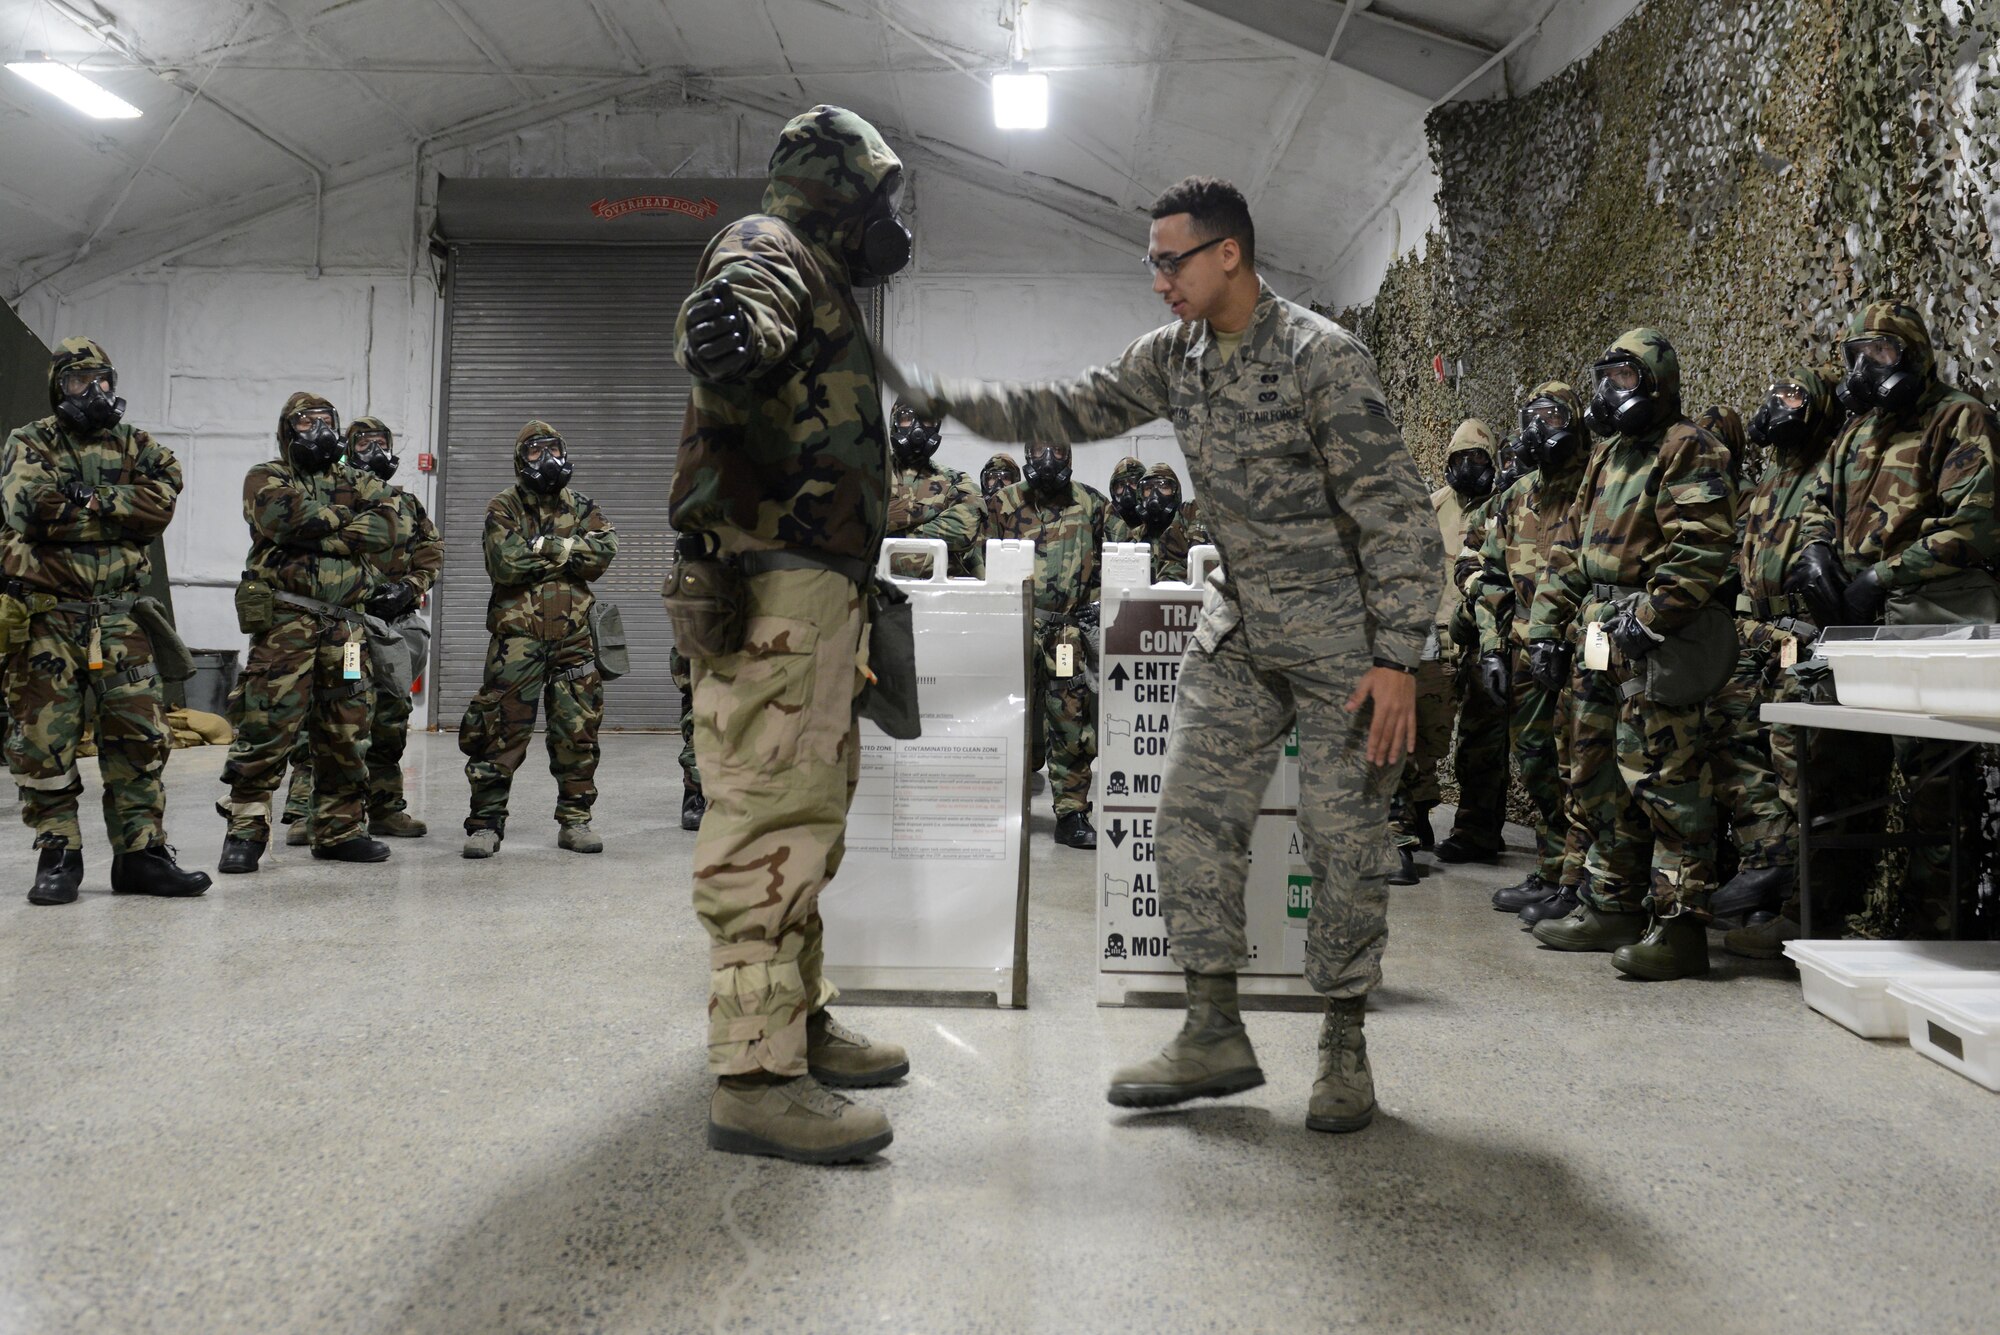 During Polar Force 18-1, Airmen practiced the various equipment and procedures for CBRN and Combat Arms Training and Maintenance situations, to prepare the installation for any emergency.